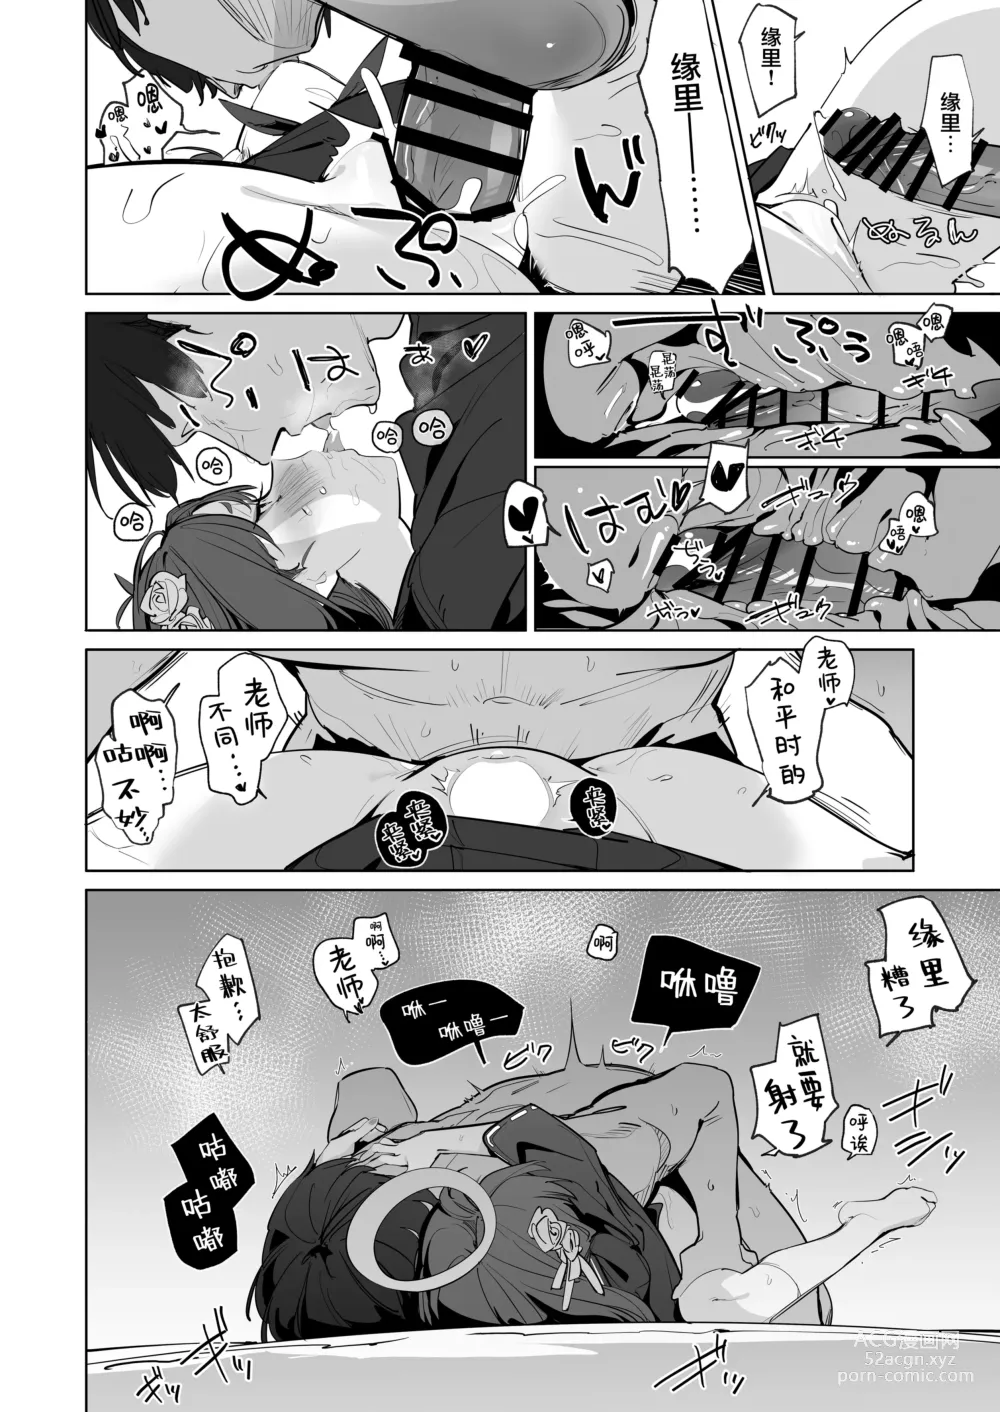 Page 16 of doujinshi 今日也请多多指导在下